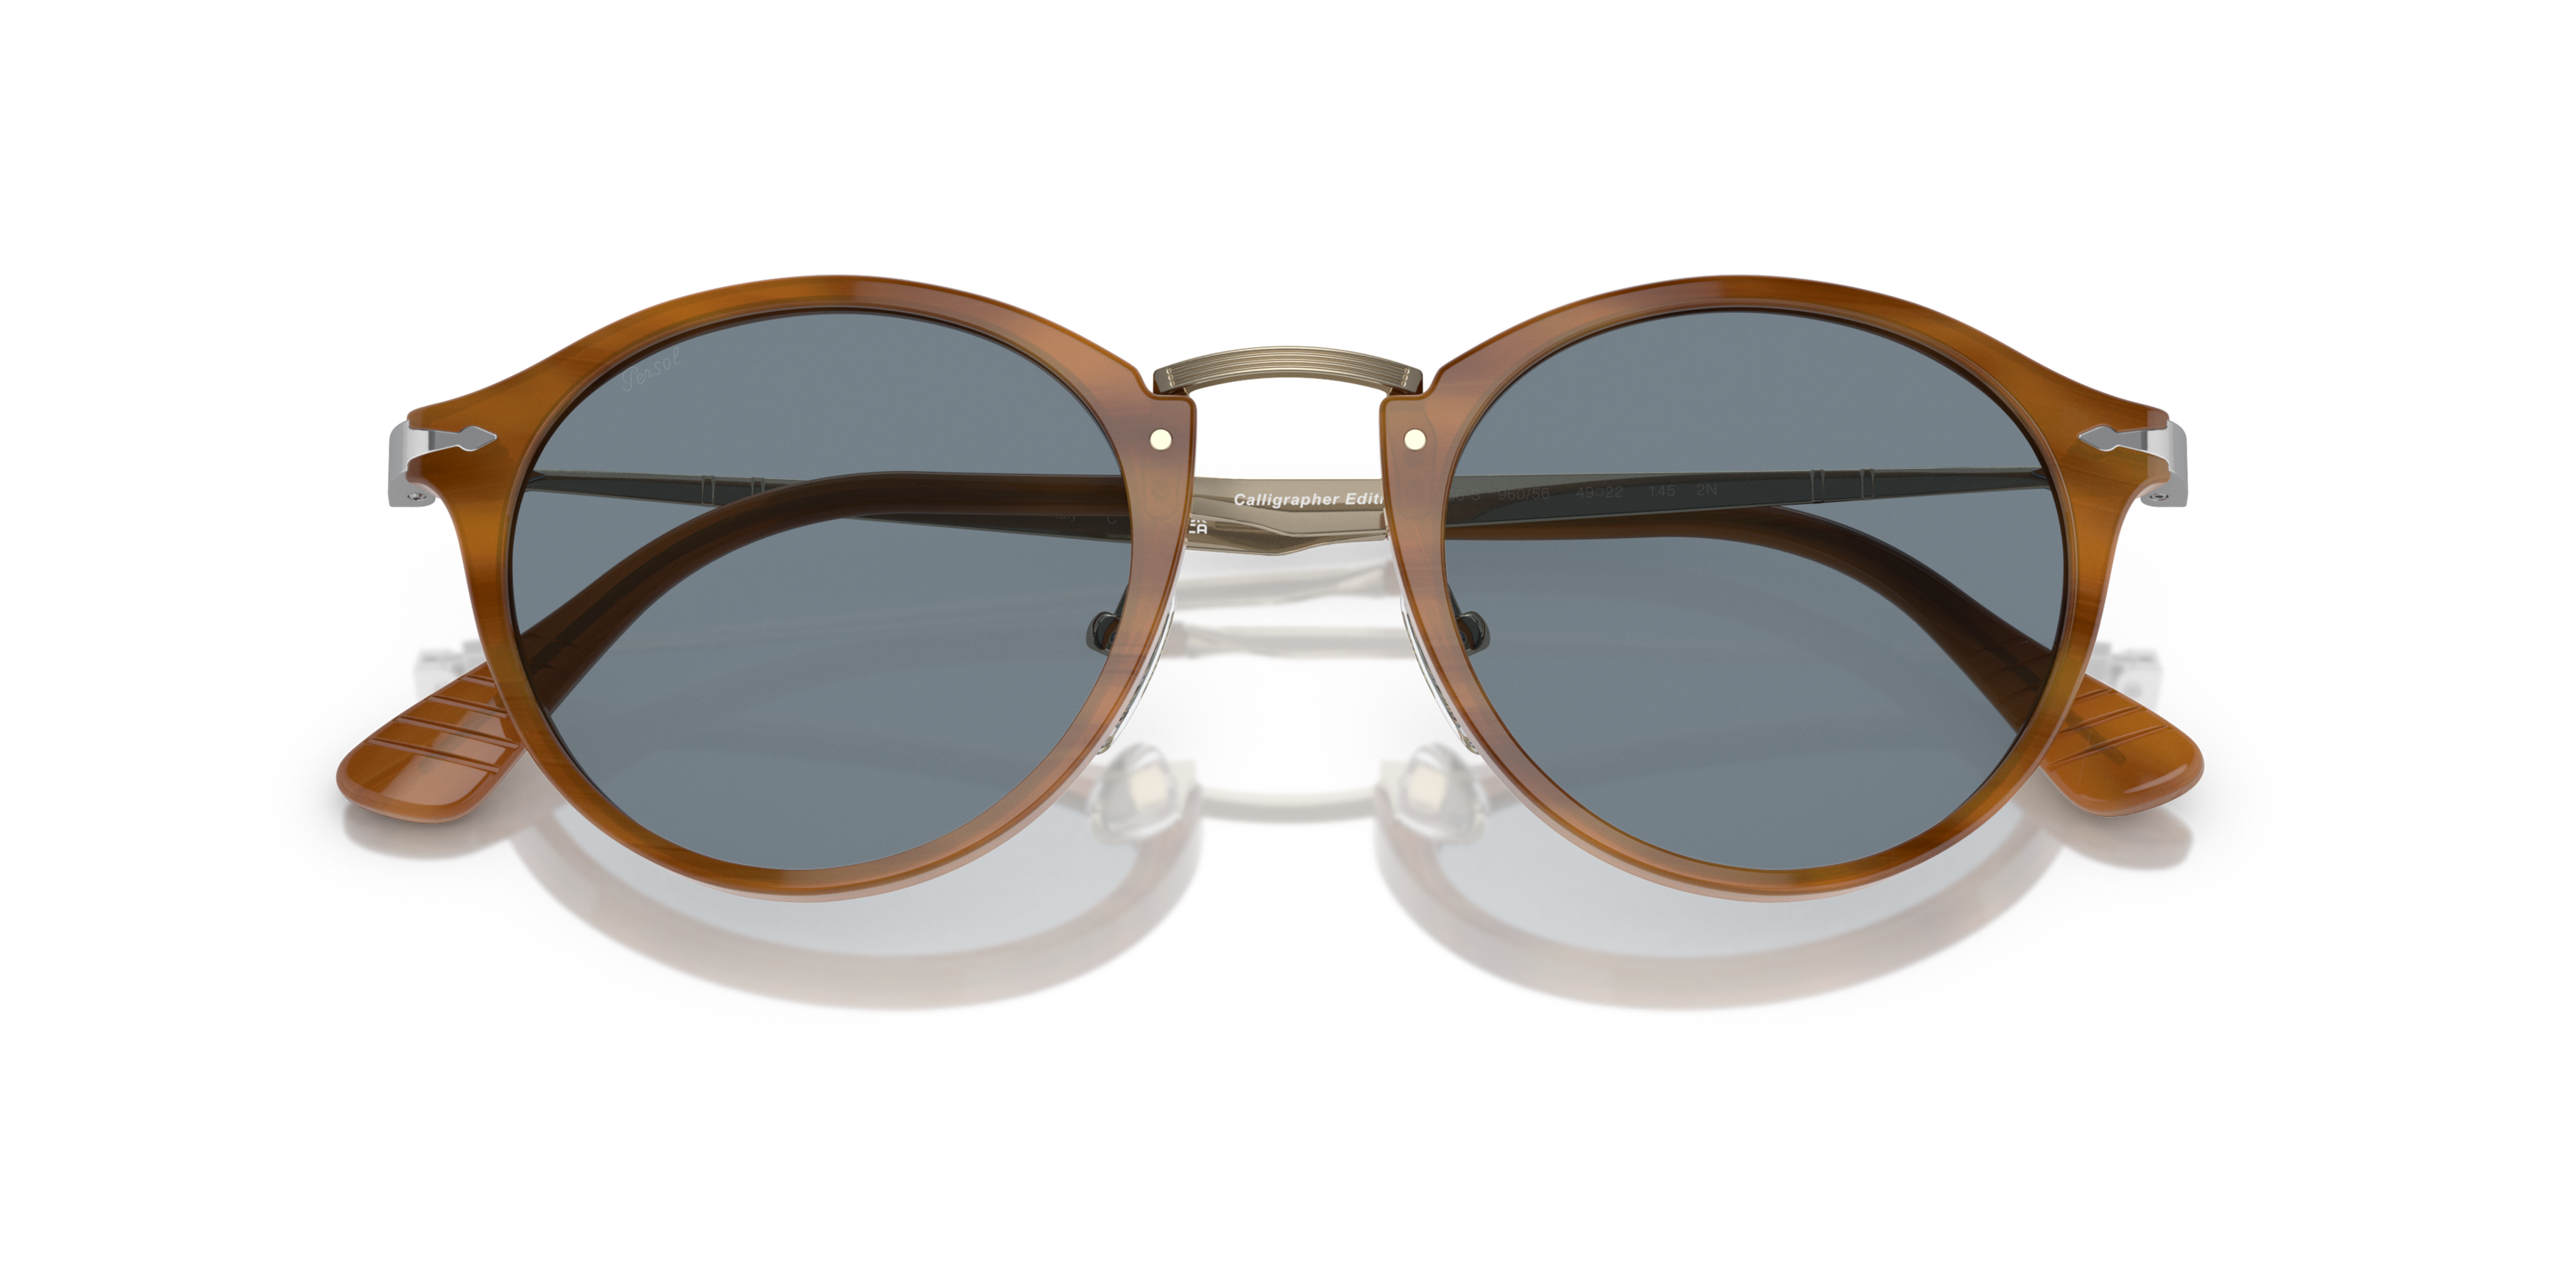 [products.image.folded] Persol PO3166S 960